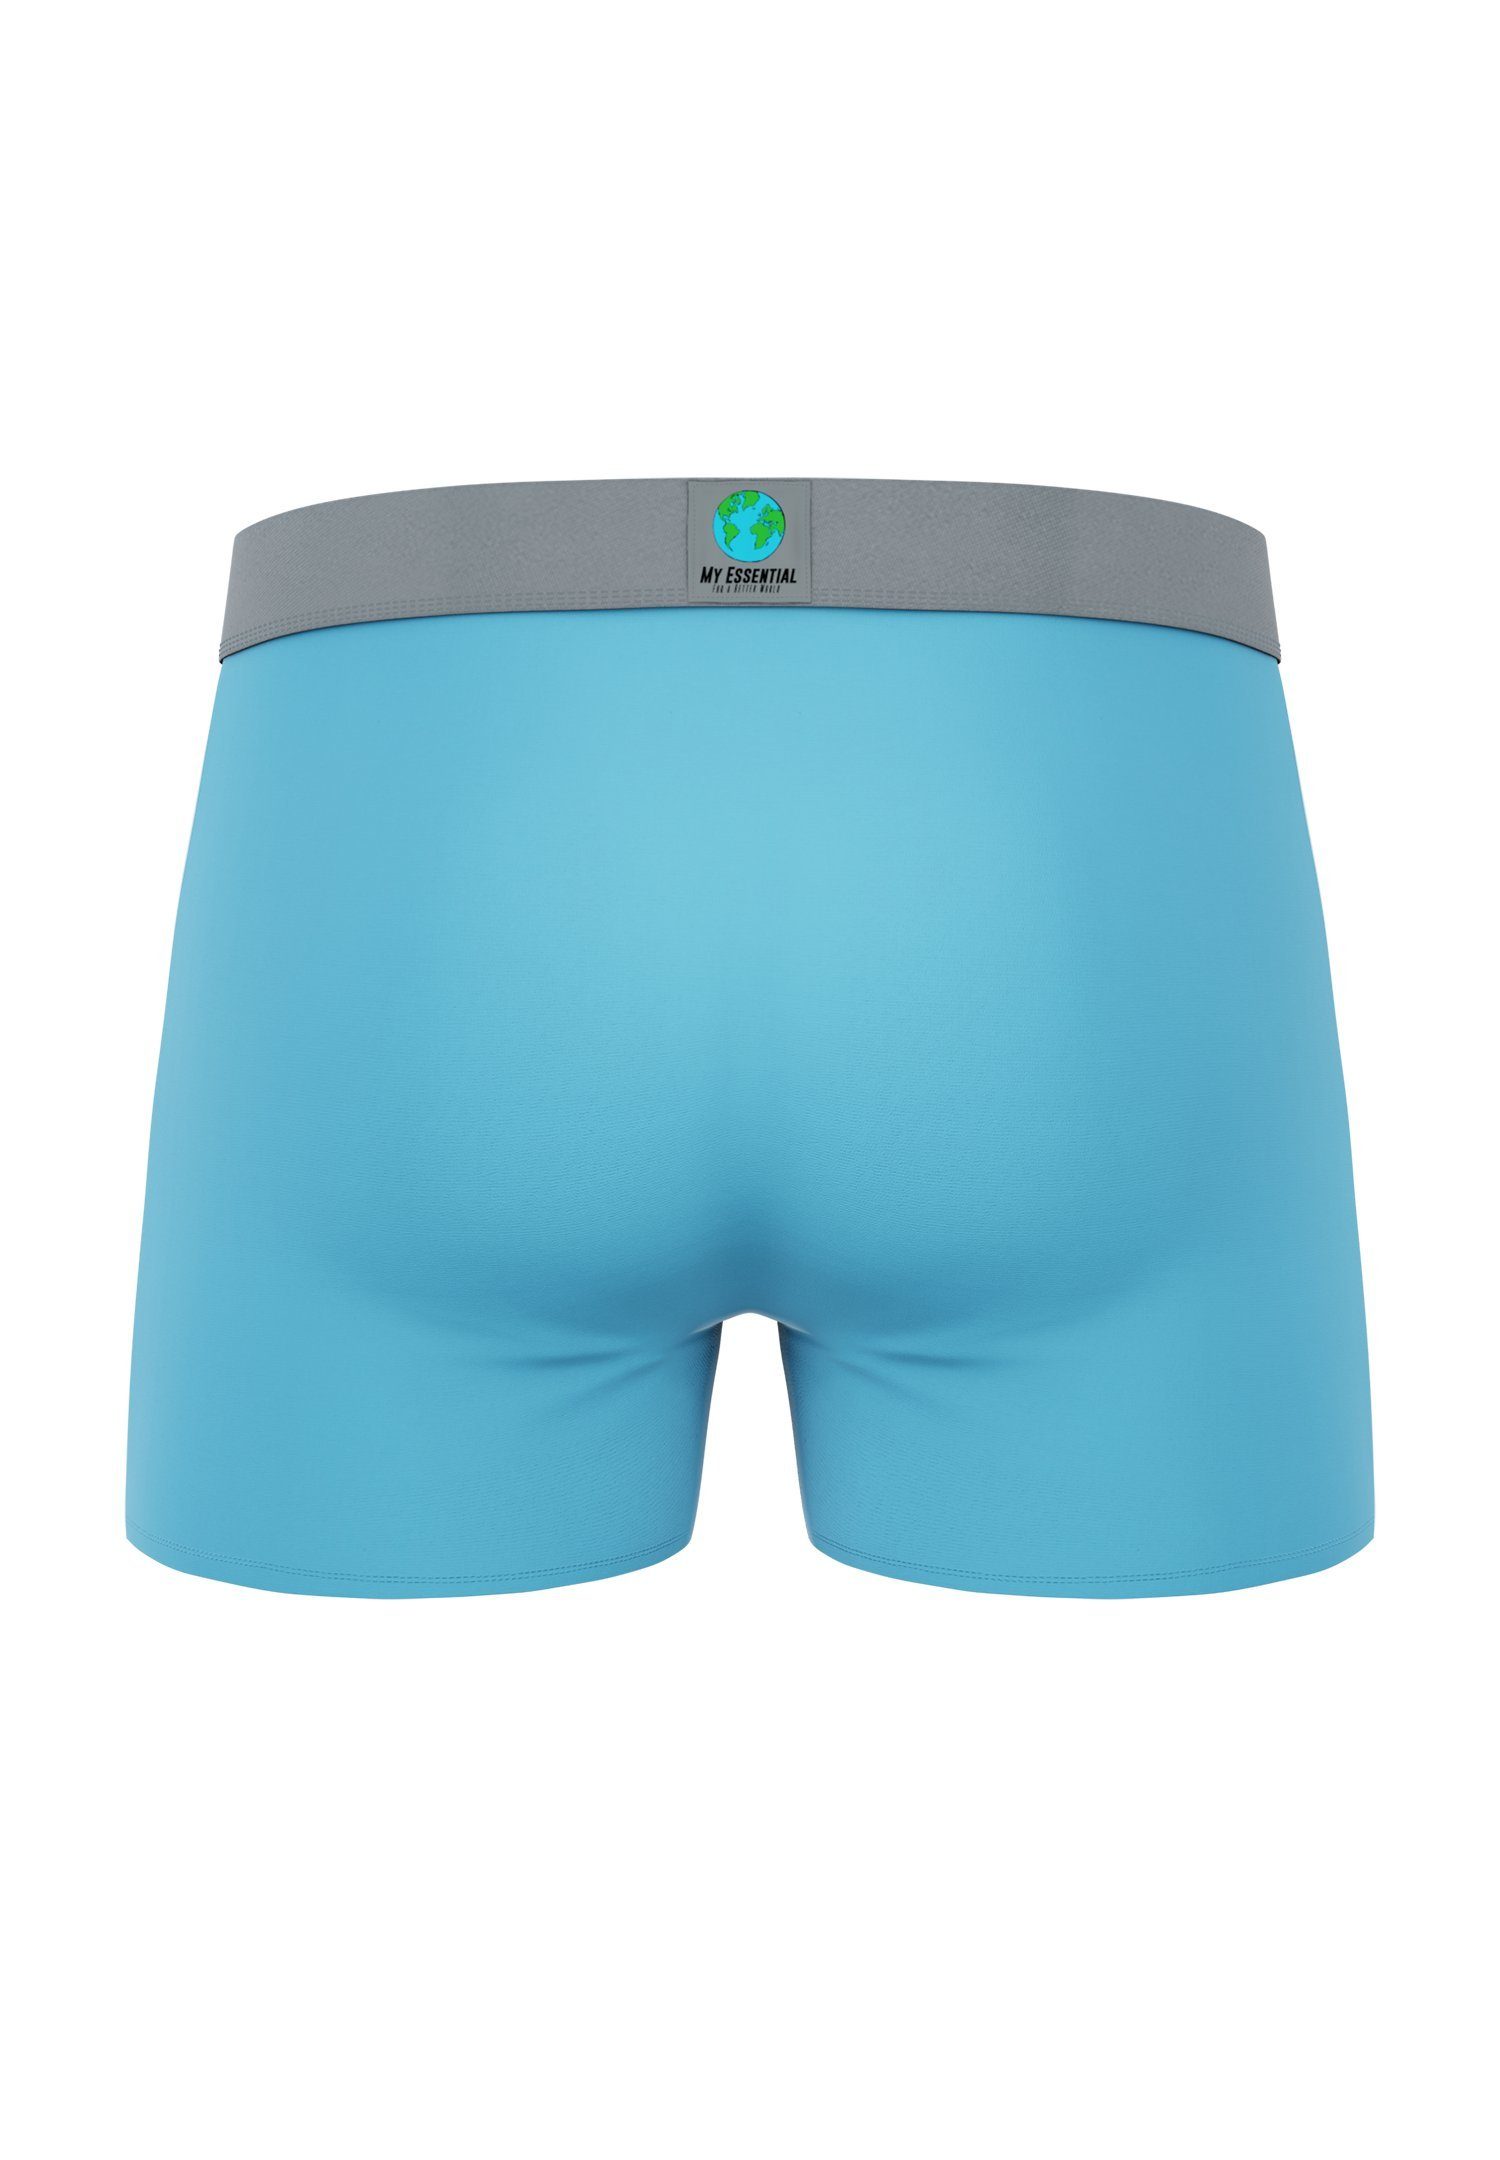 Bio 3 Cotton Boxers (Spar-Pack, 3er-Pack) Essential My Blue Pack My Essential Boxershorts 3-St., Clothing